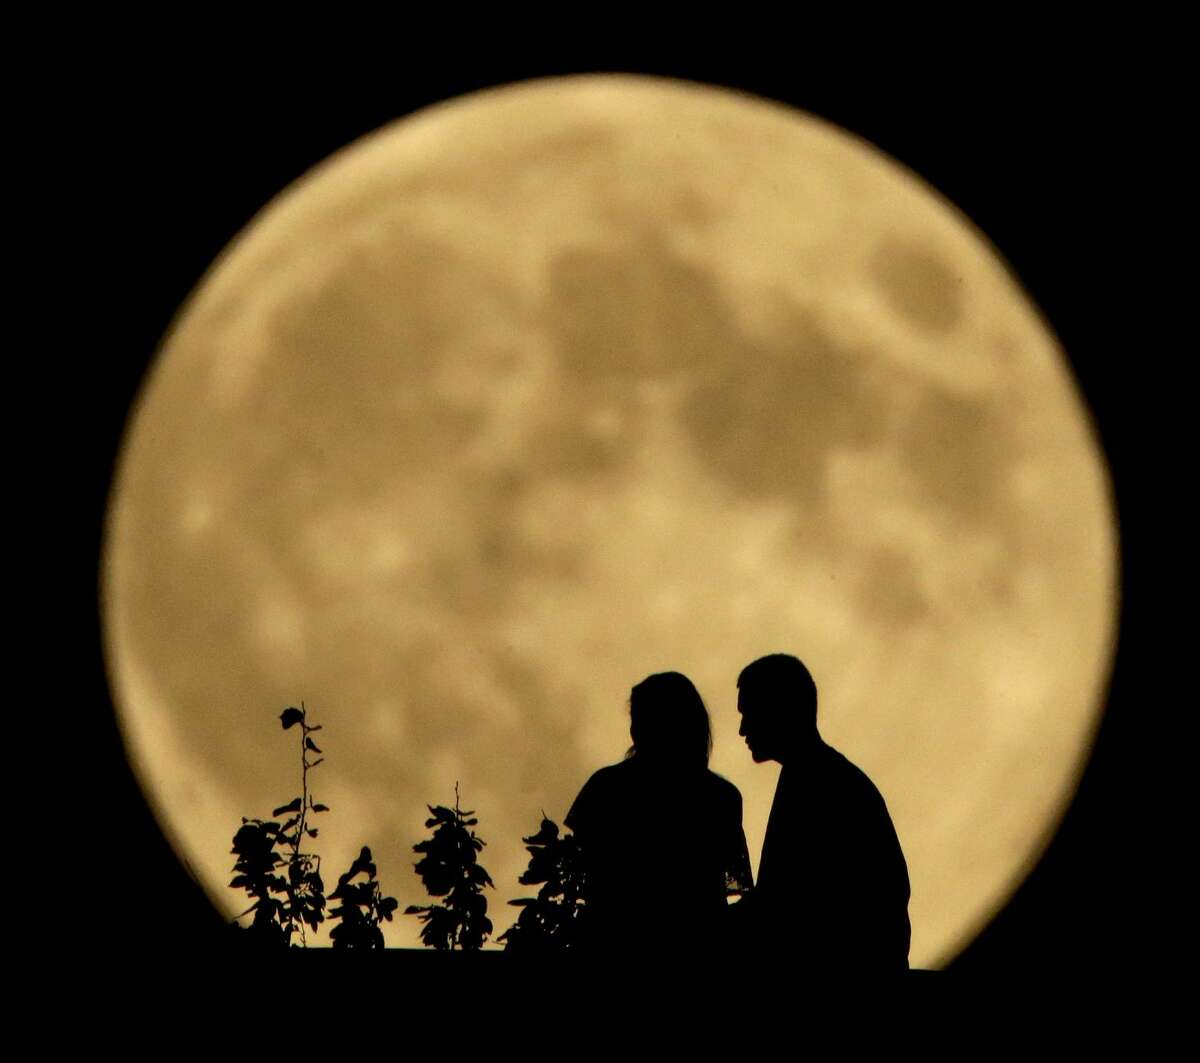 A couple sits on a bluff overlooking the Missouri River as the full moon rises in the distance Monday, Sept. 8, 2014, in Kansas City, Mo. Monday night's full moon, also known as a Harvest Moon, will be the third and final "supermoon" of 2014. The phenomenon, which scientists call a "perigee moon," occurs when the moon is near the horizon and appears larger and brighter than other full moons. (AP Photo/Charlie Riedel)